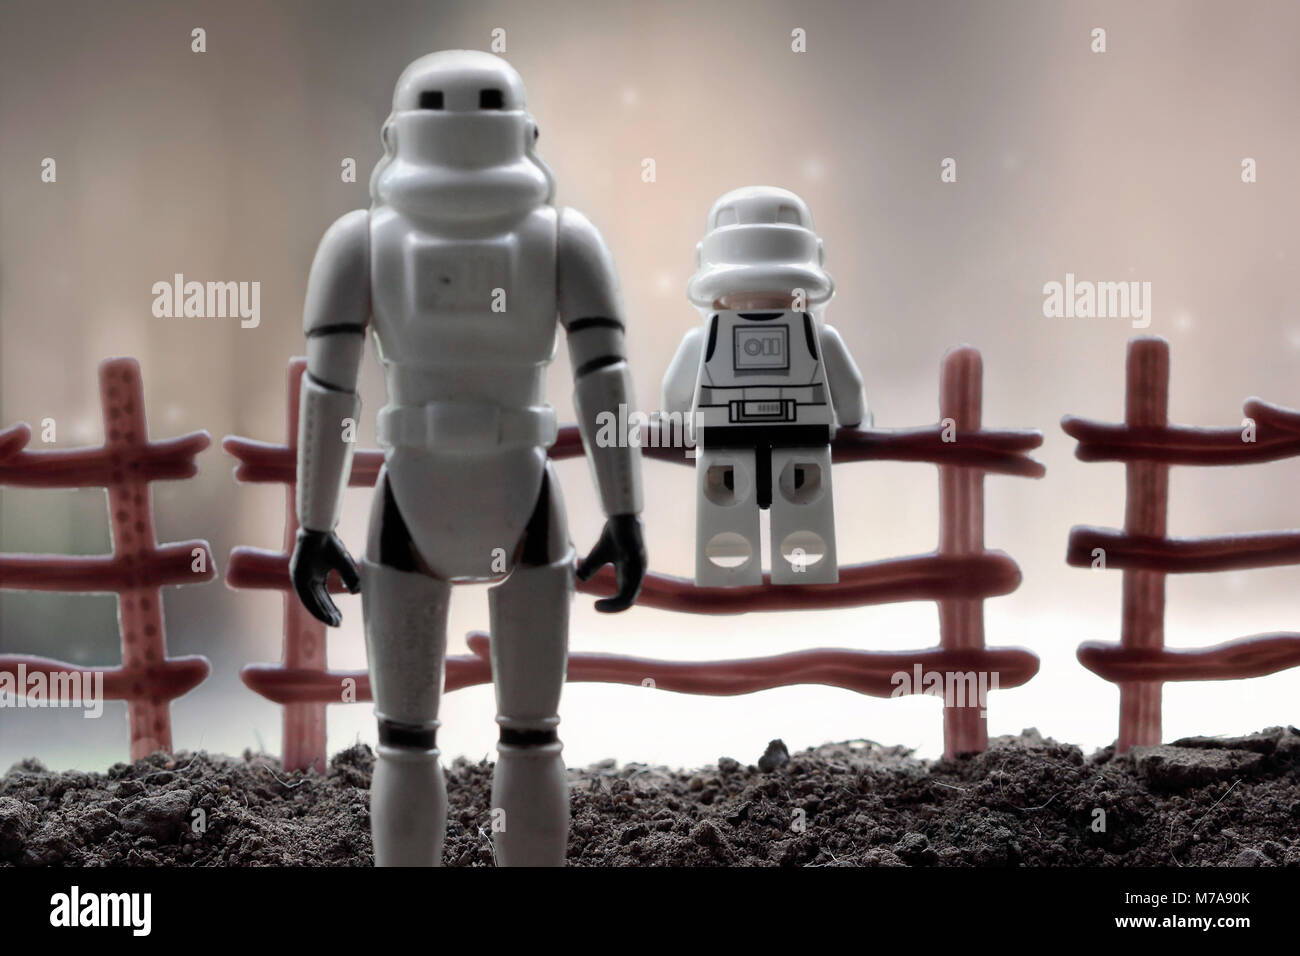 Lego Stormtrooper Star Stormtrooper figure father and son enjoying a view Stock Photo -